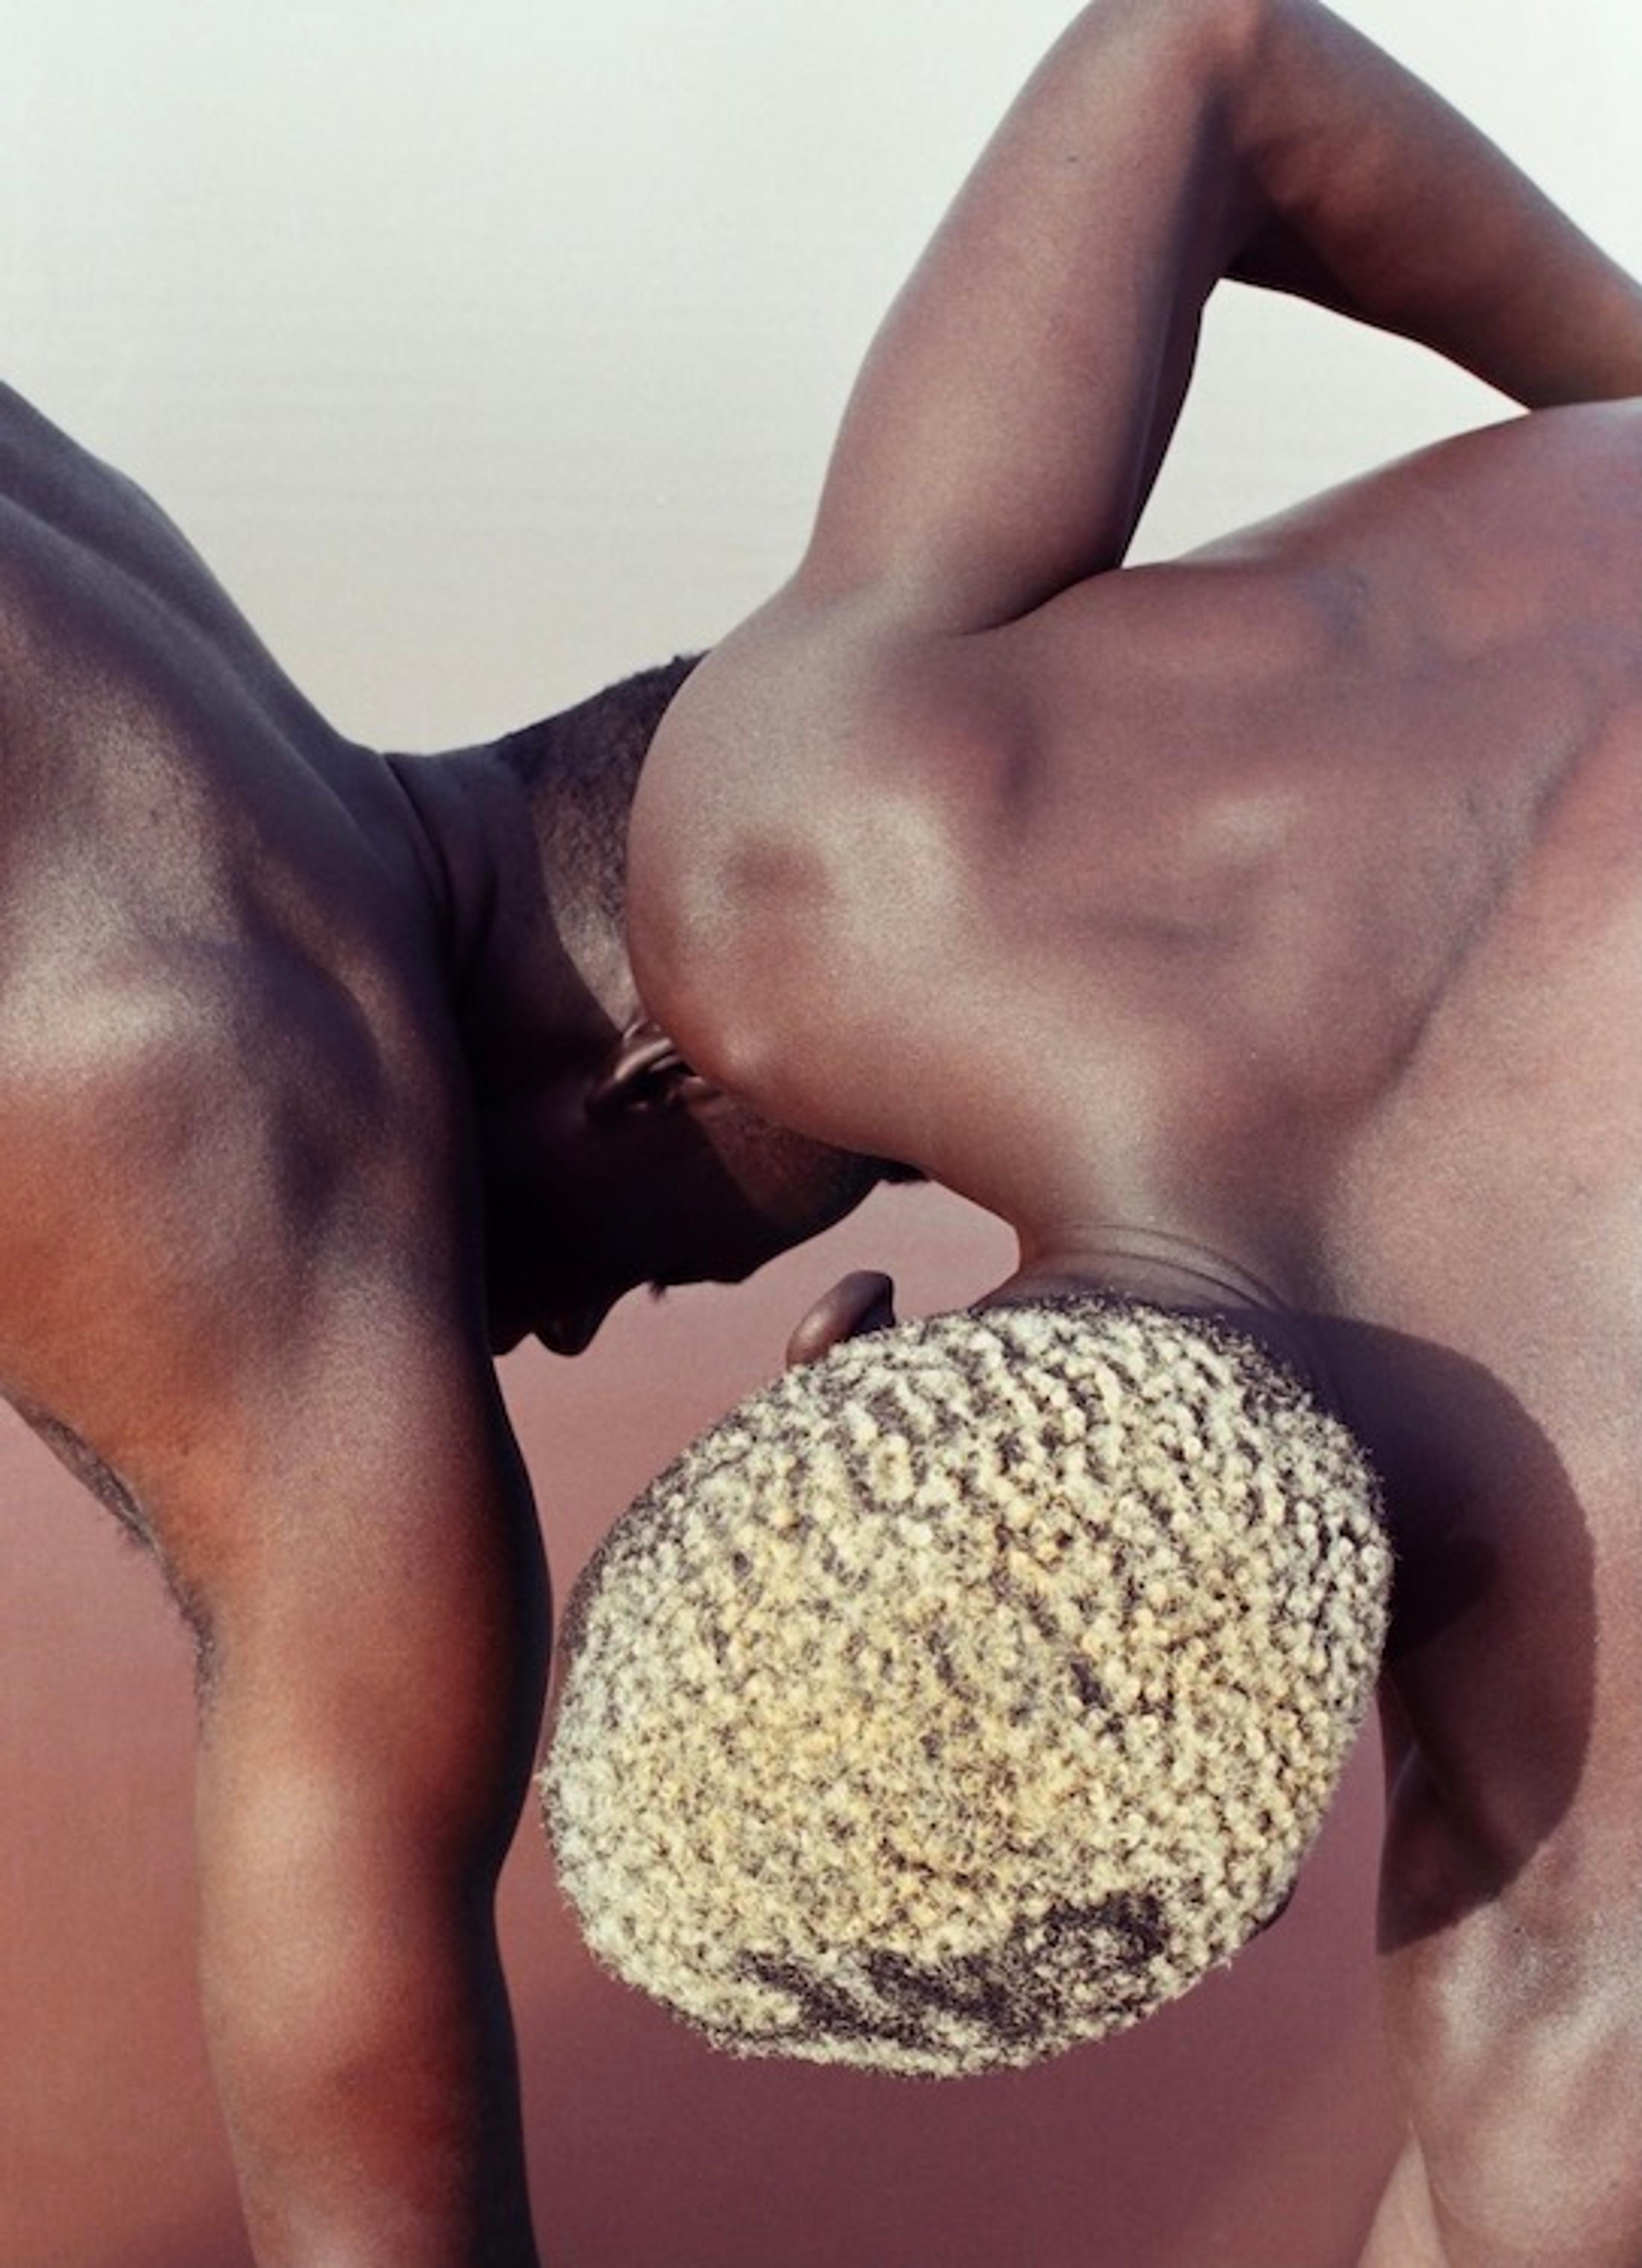 A geometric photograph of two men's heads and unclothed shoulders